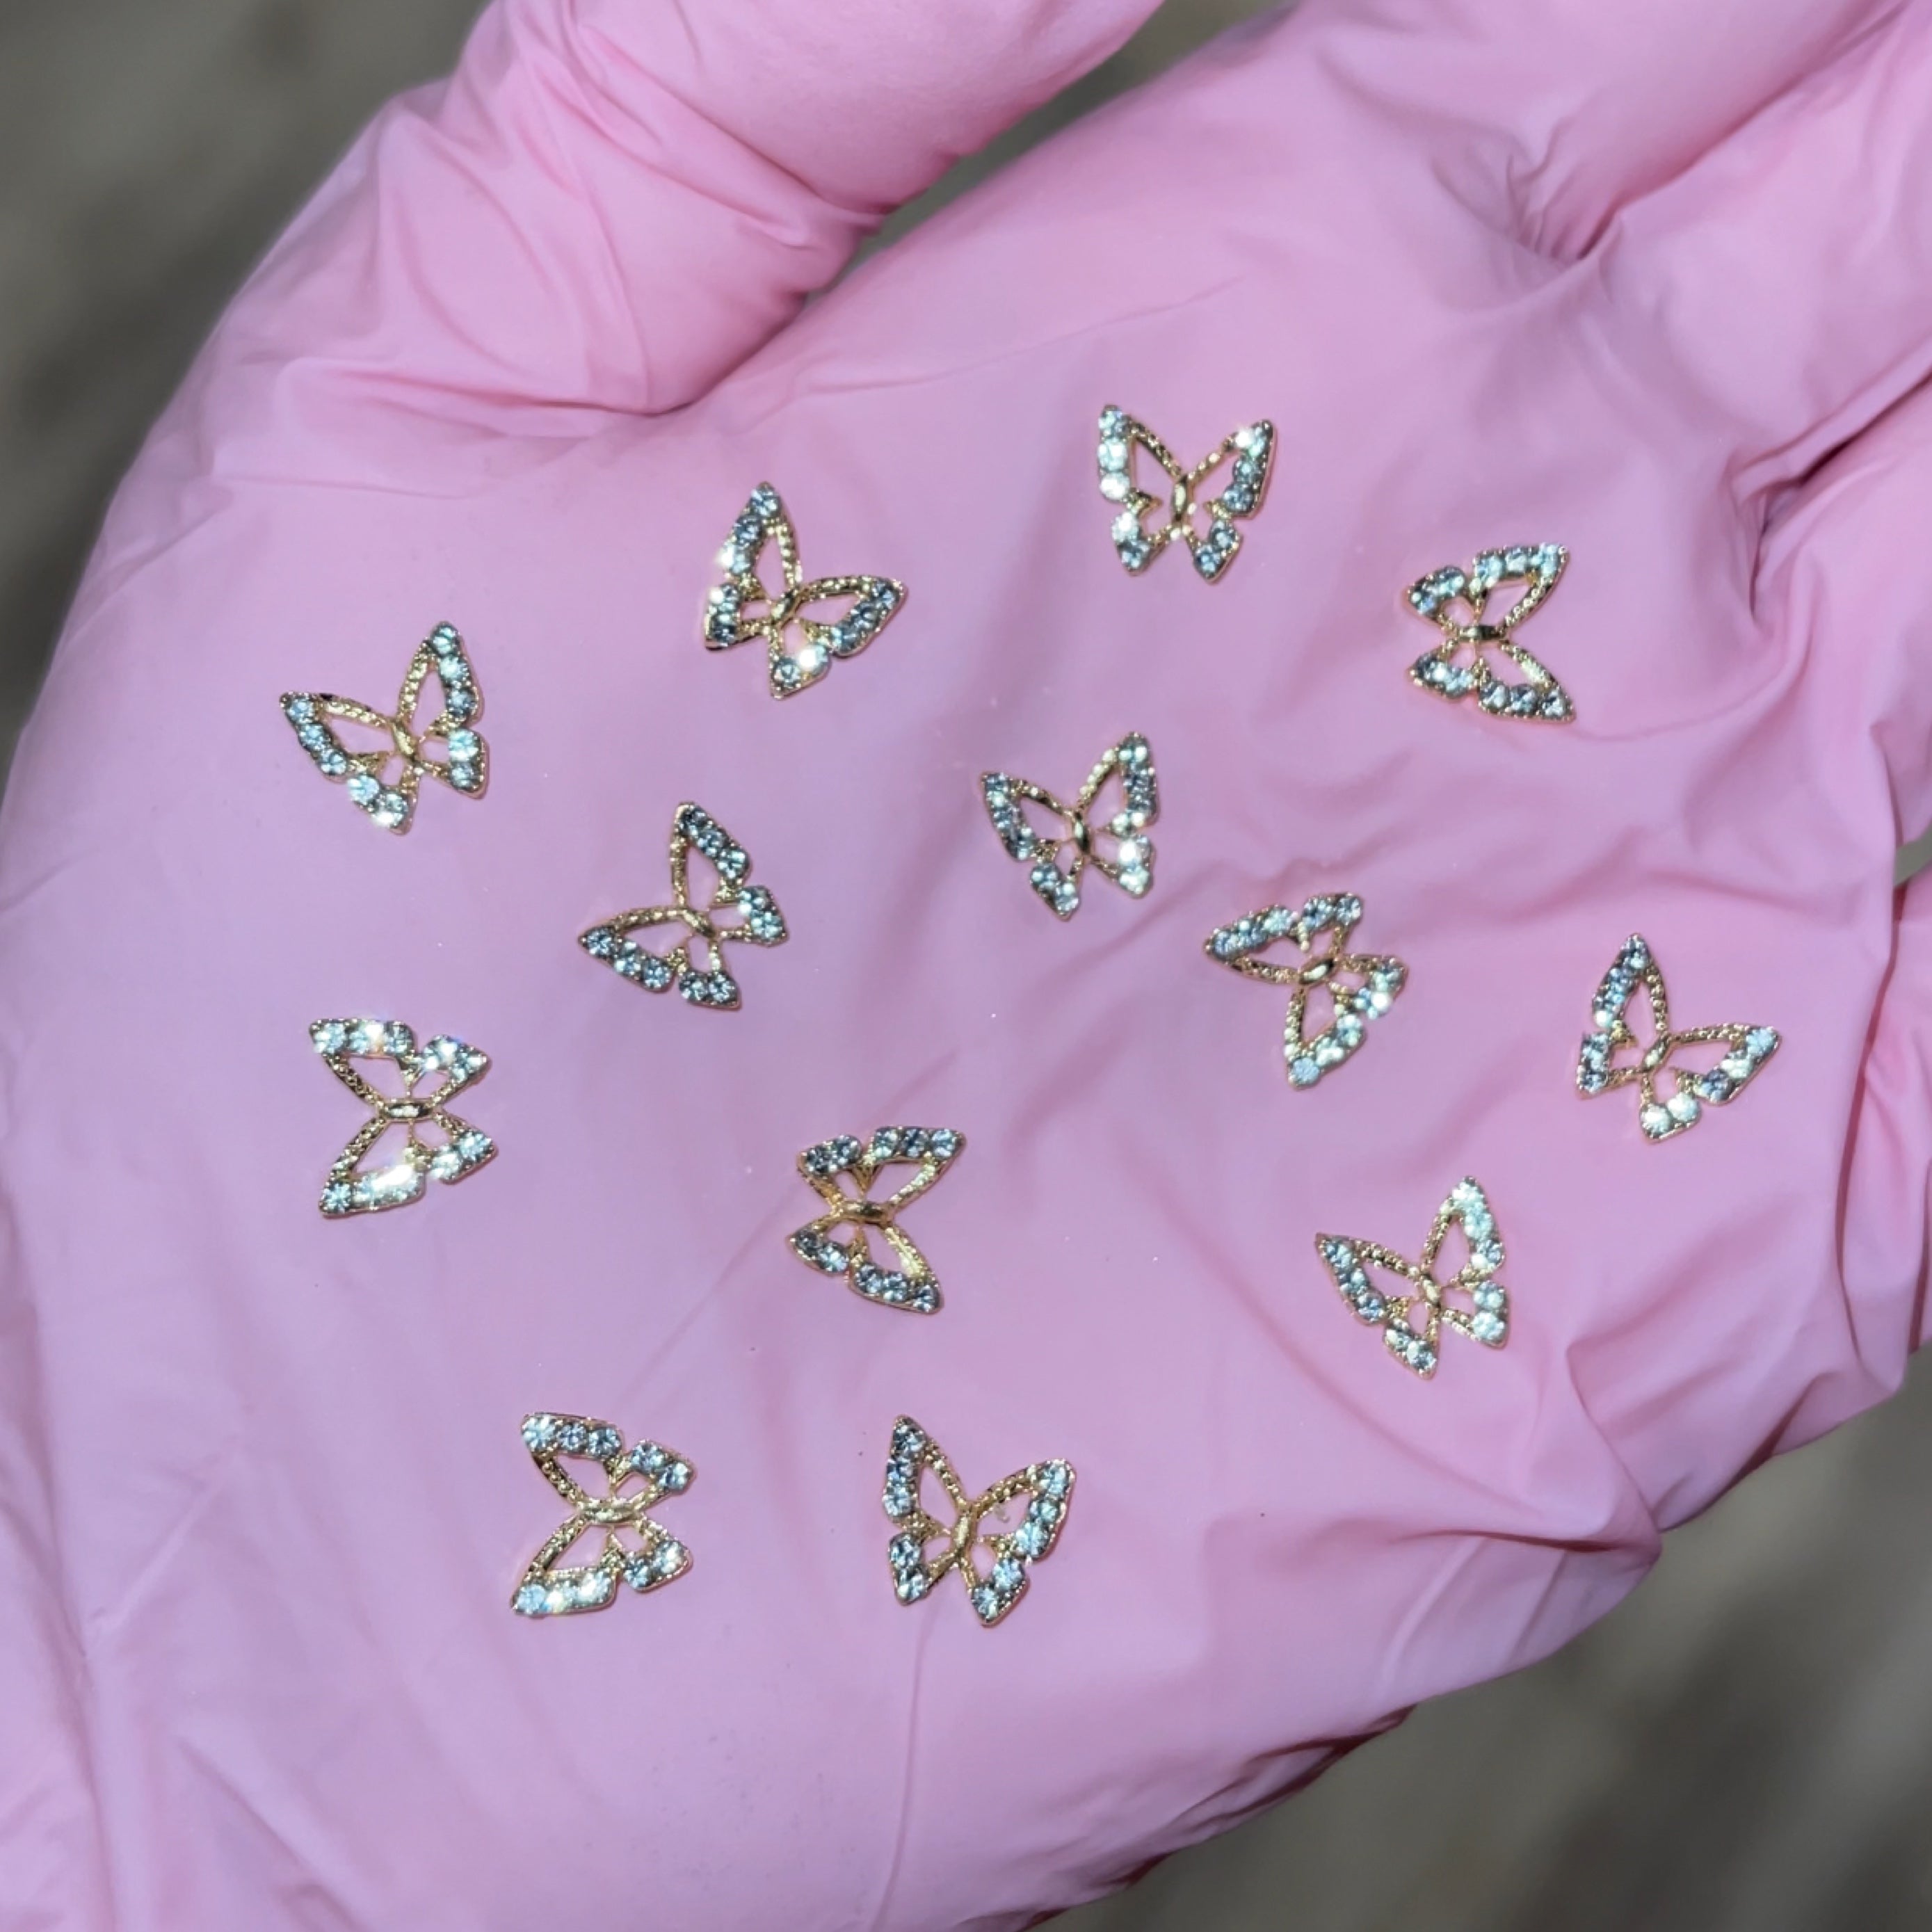 BABY BUTTERFLY CHARMS - 10PCS